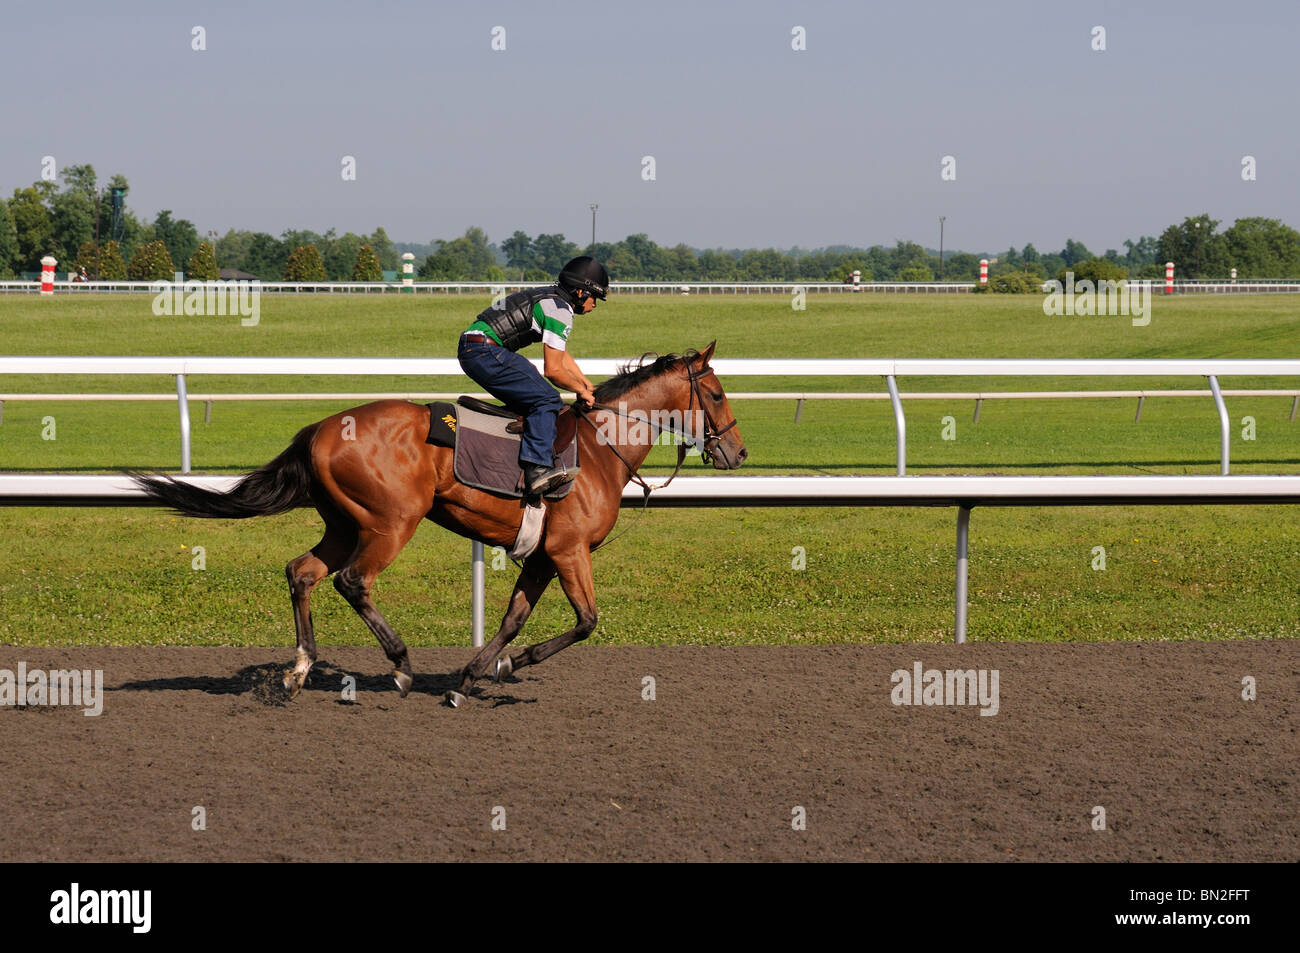 Thoroughbred horse and exercise jockey at the Keeneland horse racing track in Lexington, Kentucky USA Stock Photo